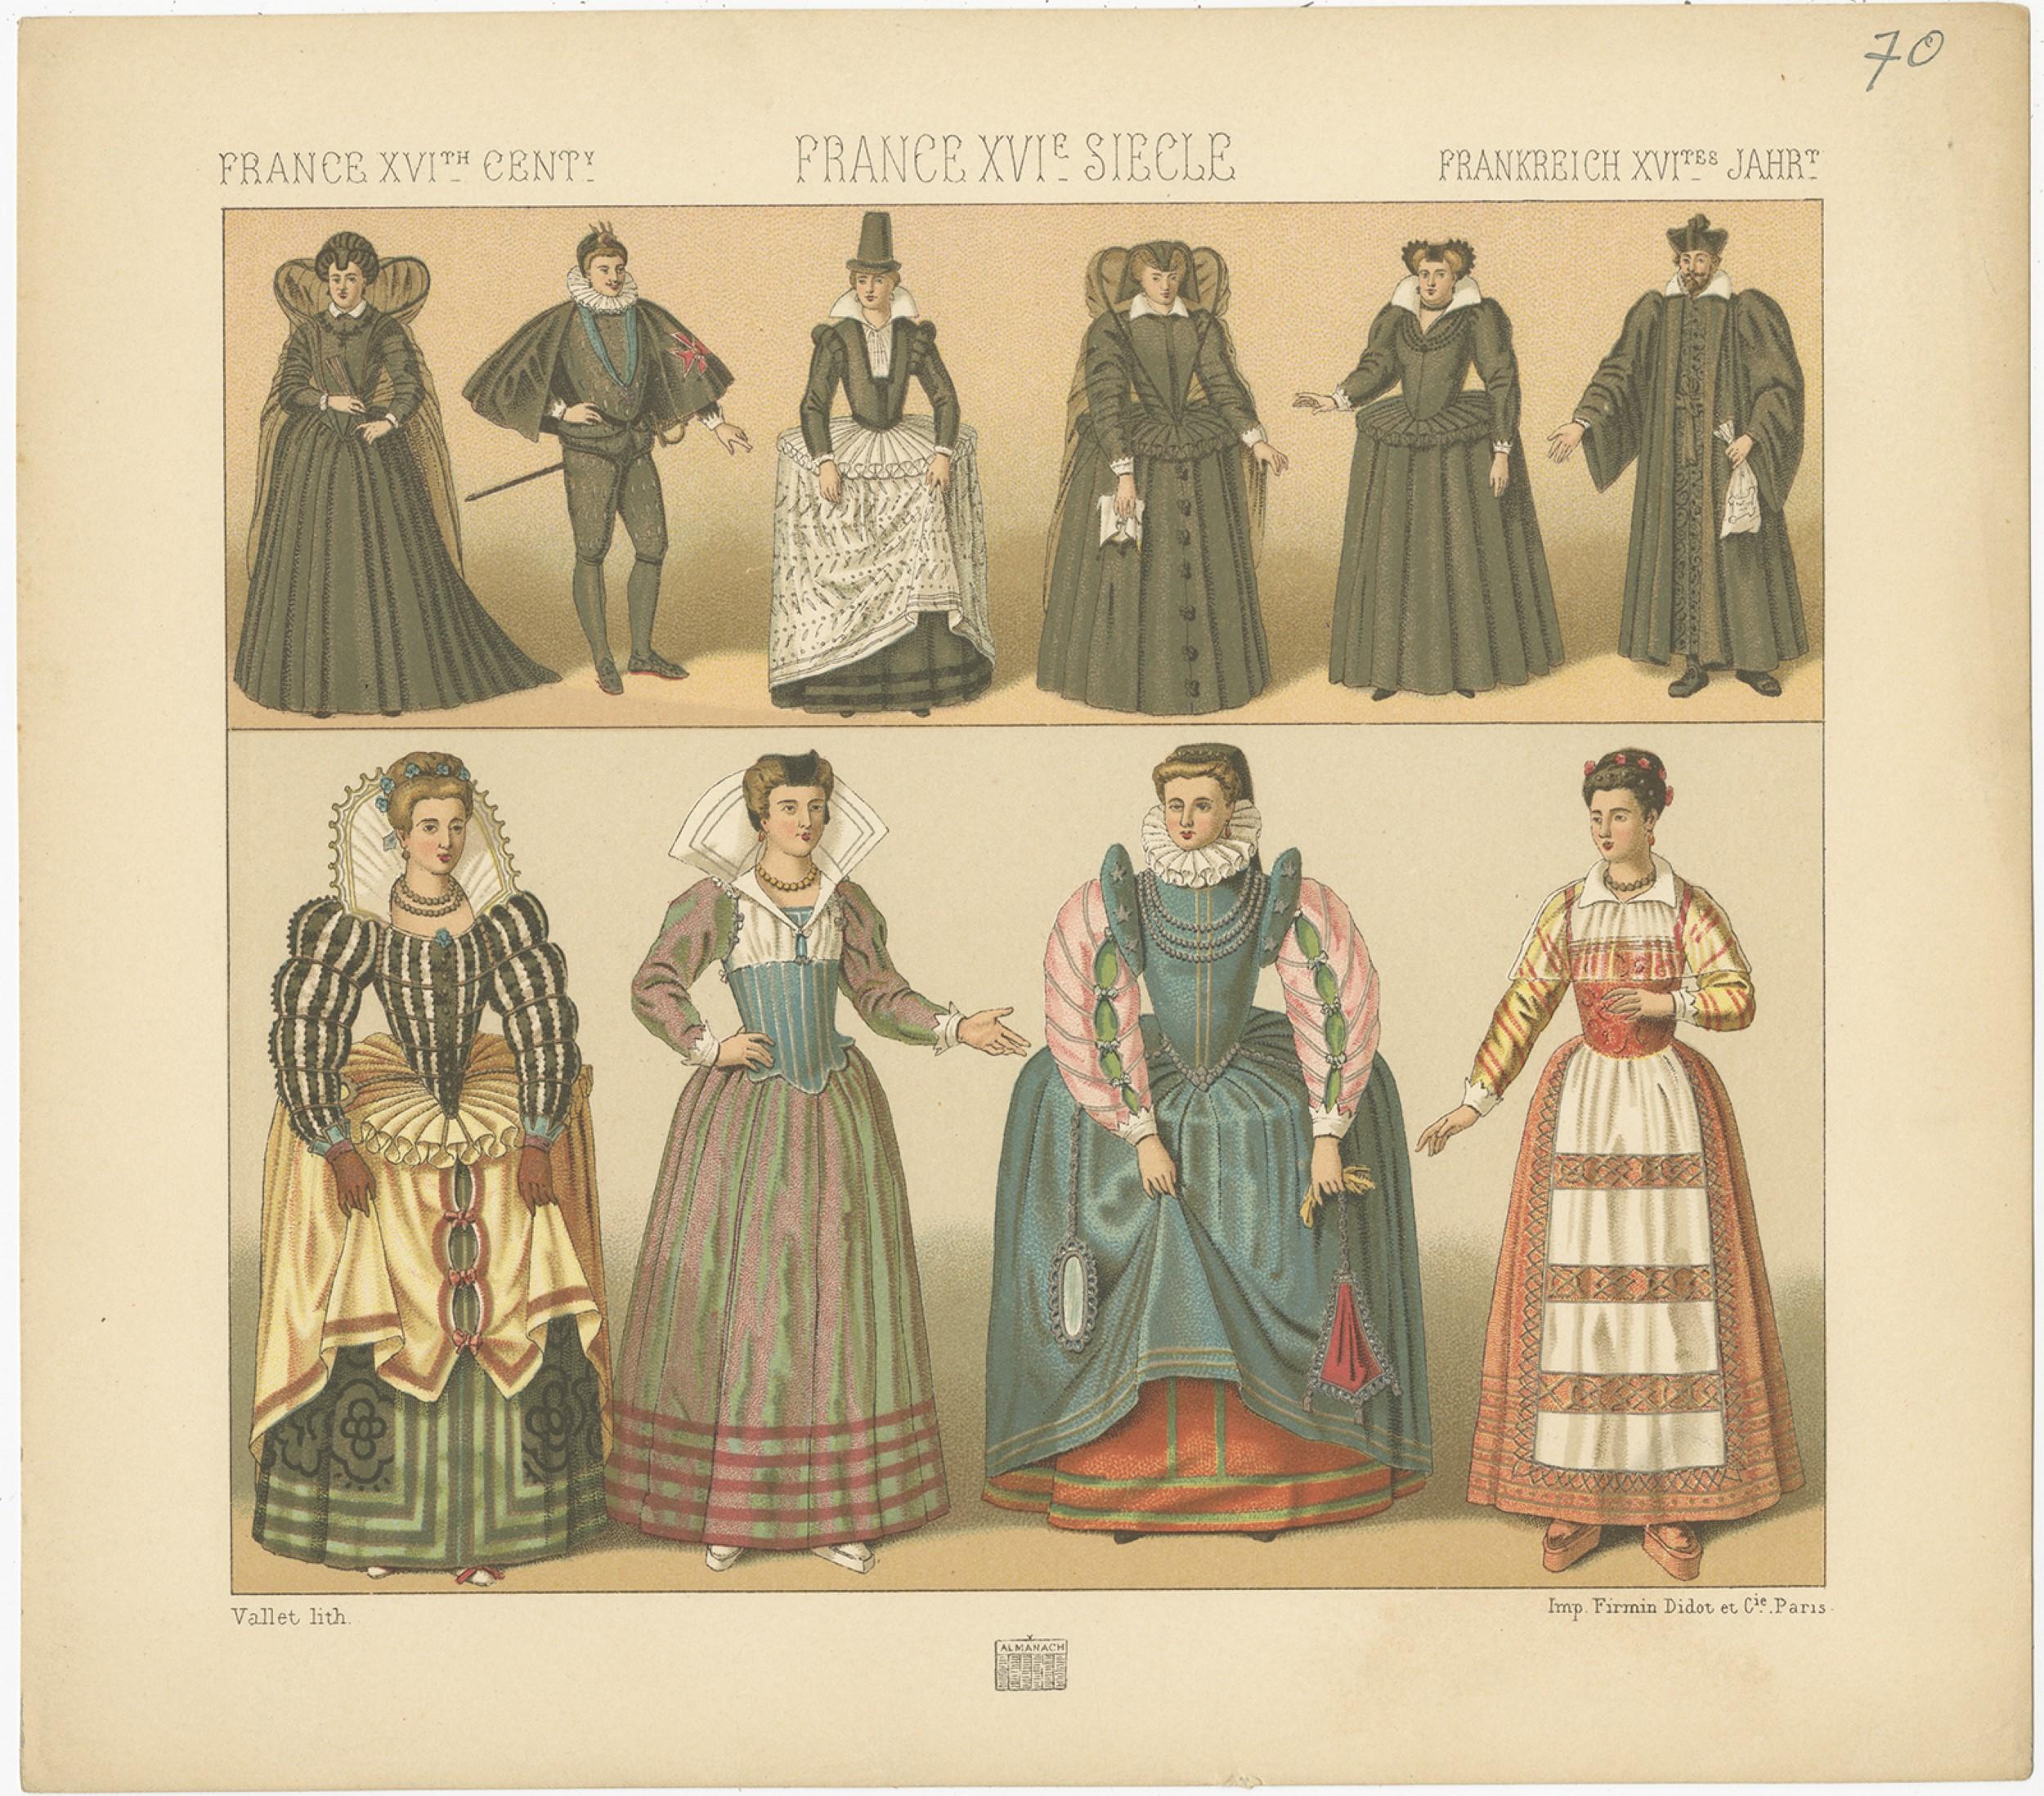 Antique print titled 'France XVI Cent - France XVIe Siecle - FrankreichXVItes Jahr'. Chromolithograph of French 16th century costumes. This print originates from 'Le Costume Historique' by M.A. Racinet. Published circa 1880.